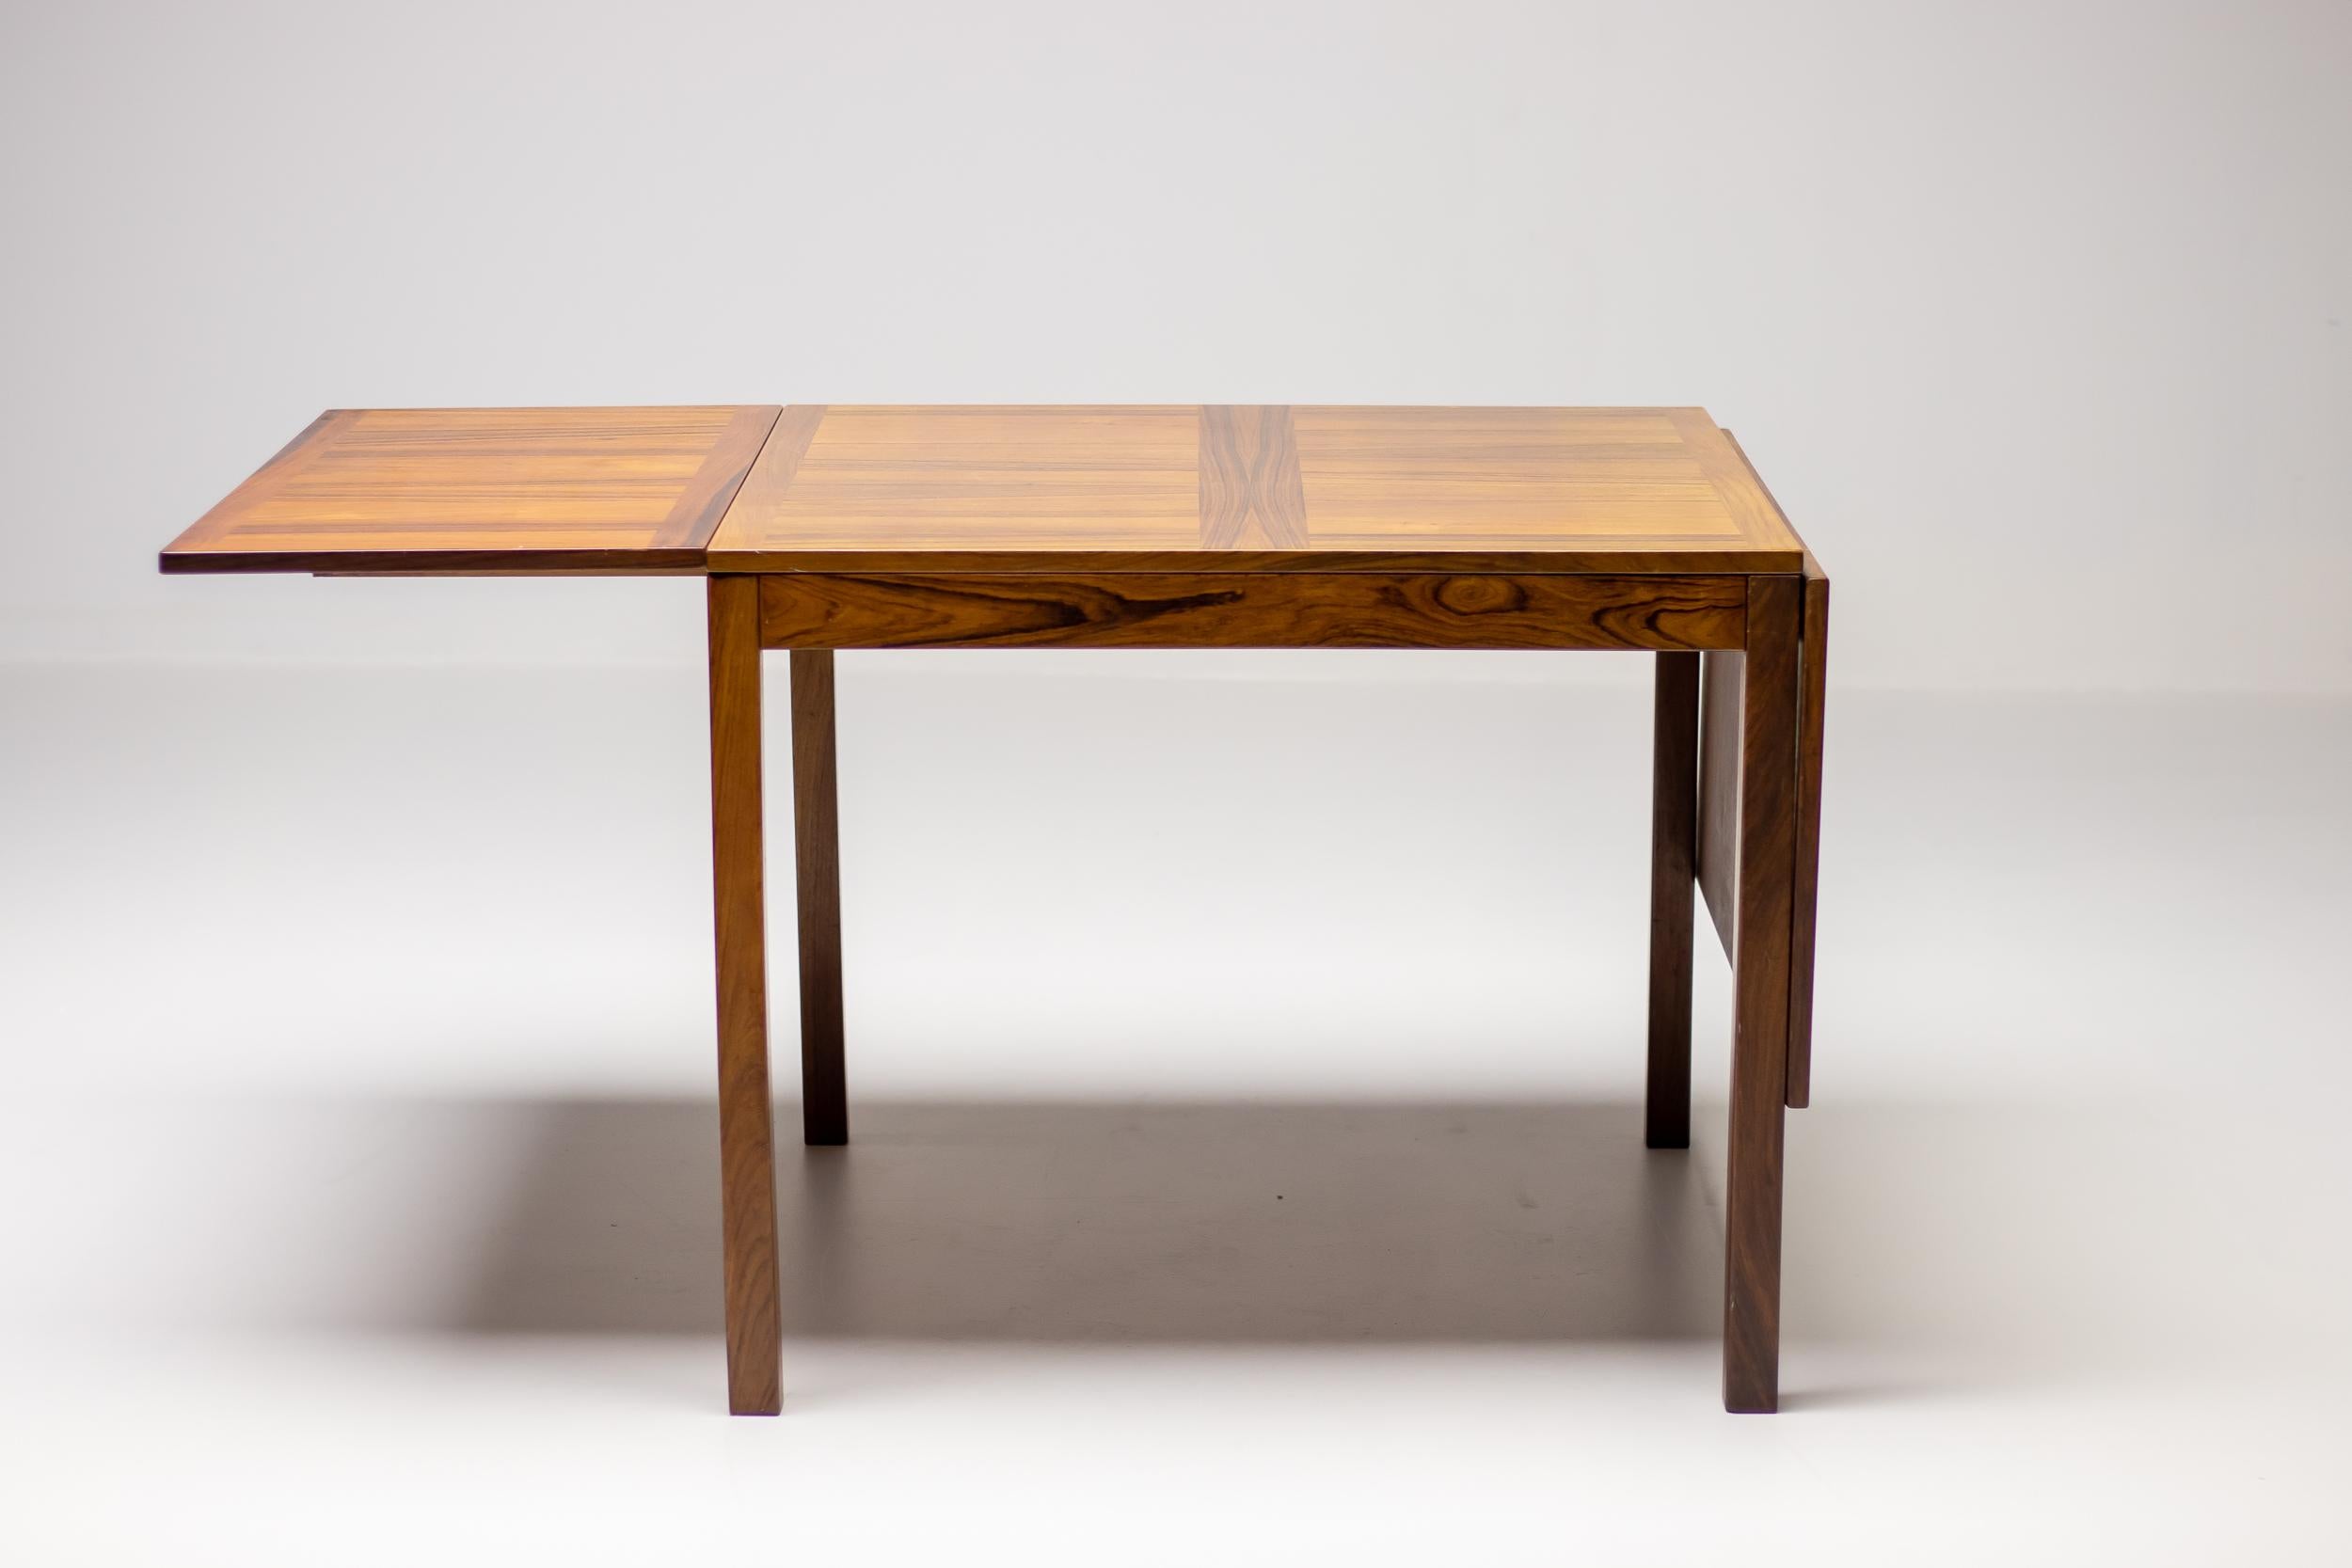 A beautiful Mid-Century Modern rosewood drop leaf dining table with two removable leaves ensuring convenience for additional guests. Manufactured circa 1970 by Vejle Stole & Møbelfabrik.
A rich vintage rosewood finish with the original